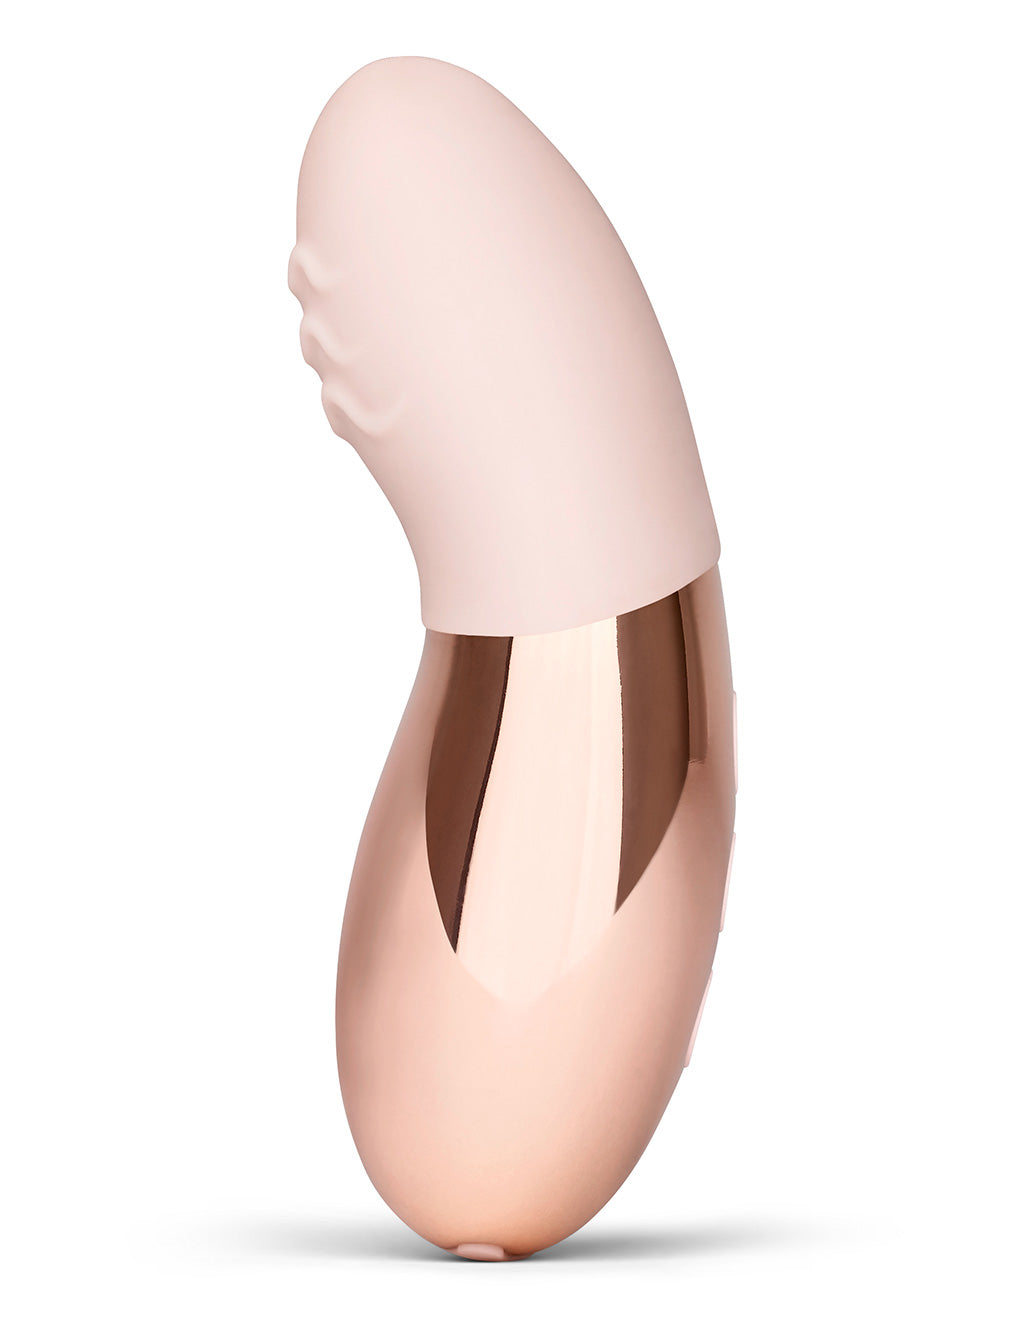 Le Wand Point Rechargeable Clitoral Vibrator- Rose Gold- Side